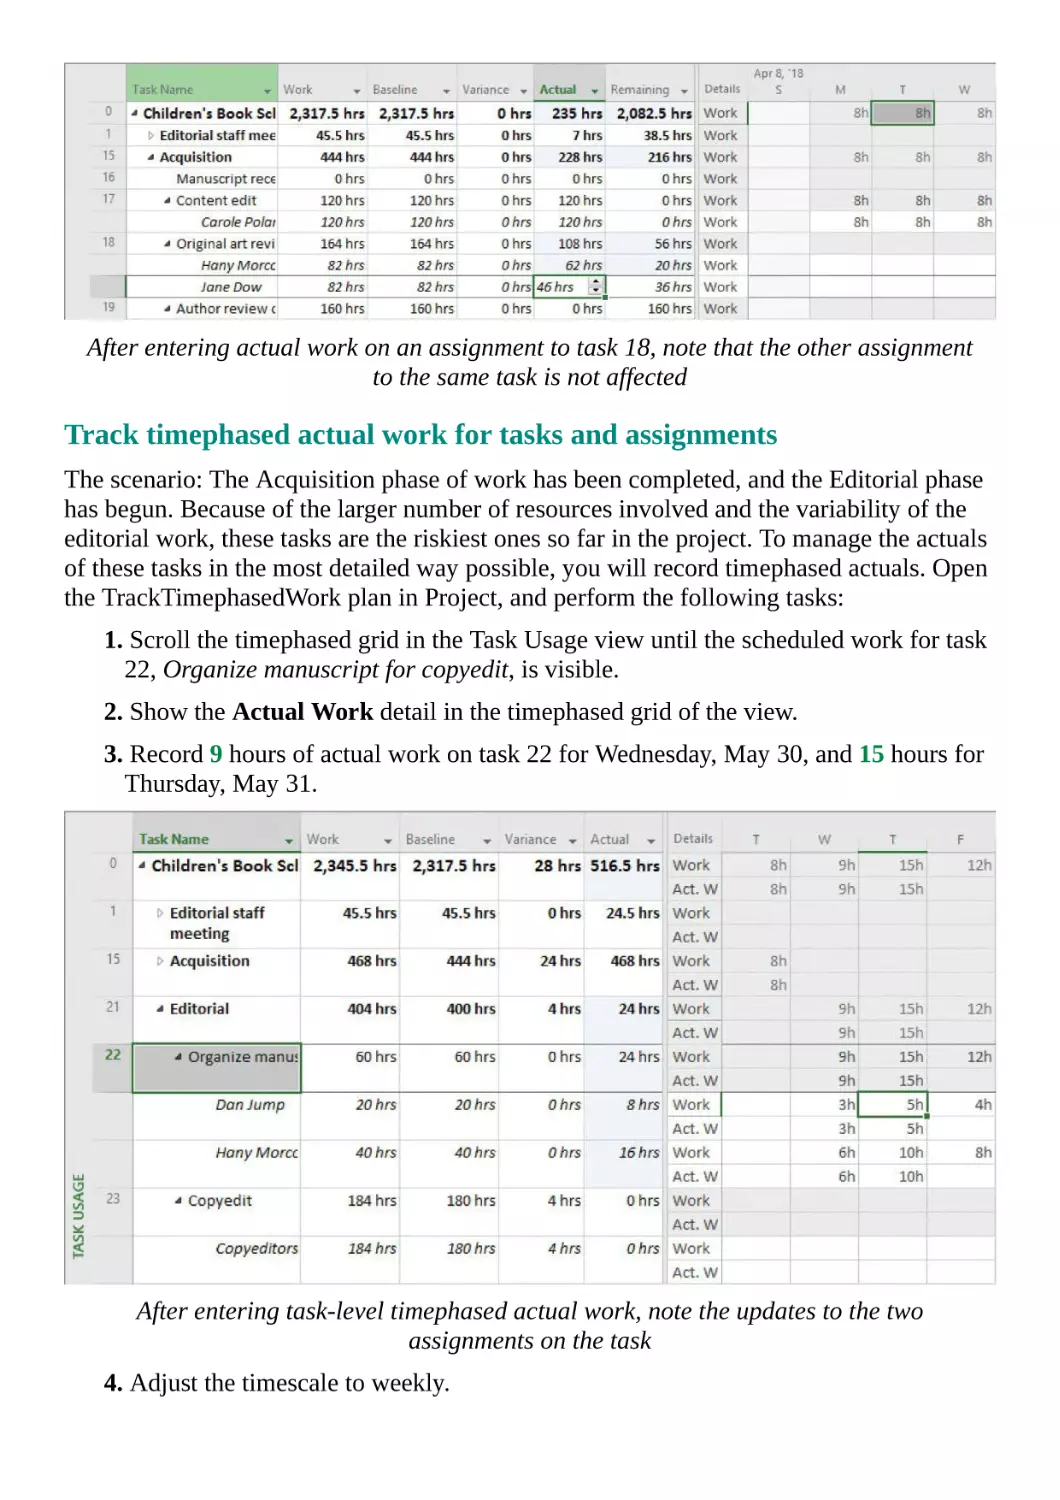 Track timephased actual work for tasks and assignments